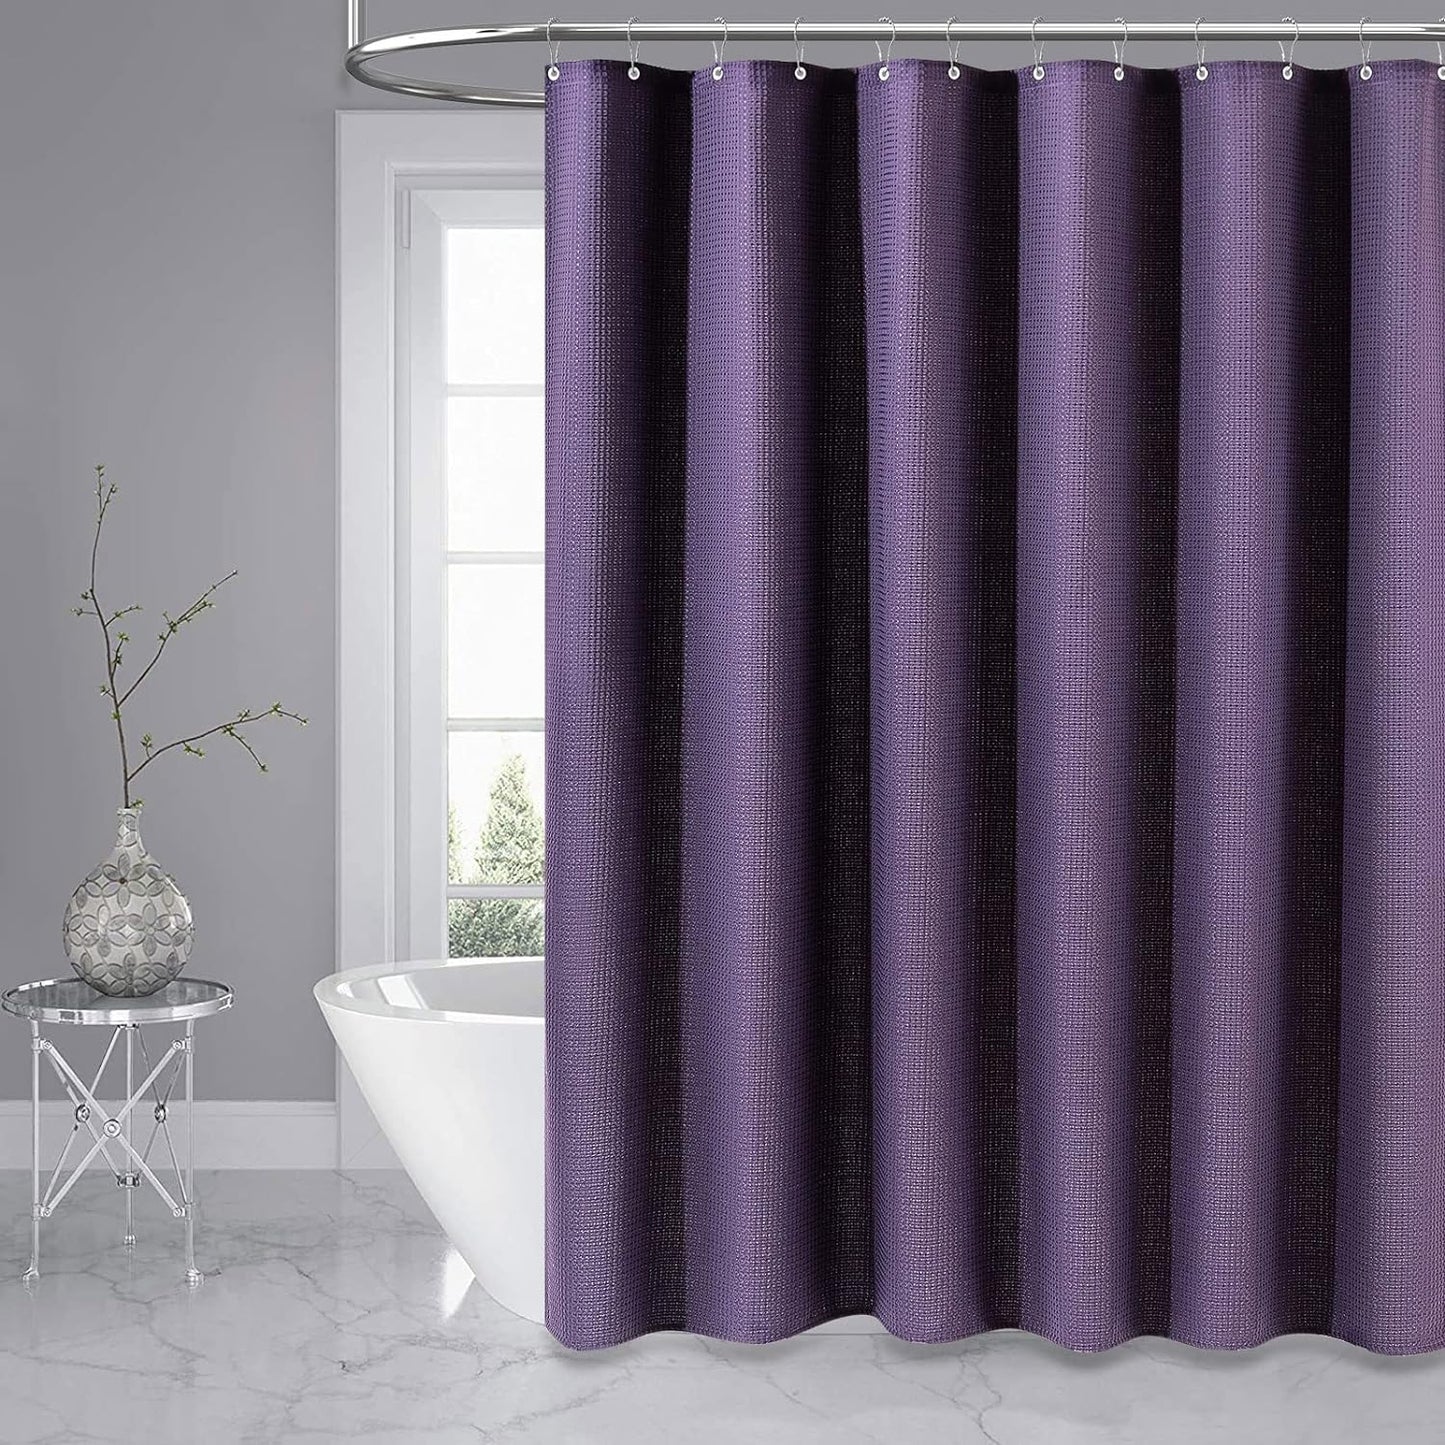 Embossed Shower Curtain With Stainless-Steel Hooks, 230 GSM, multi-size options